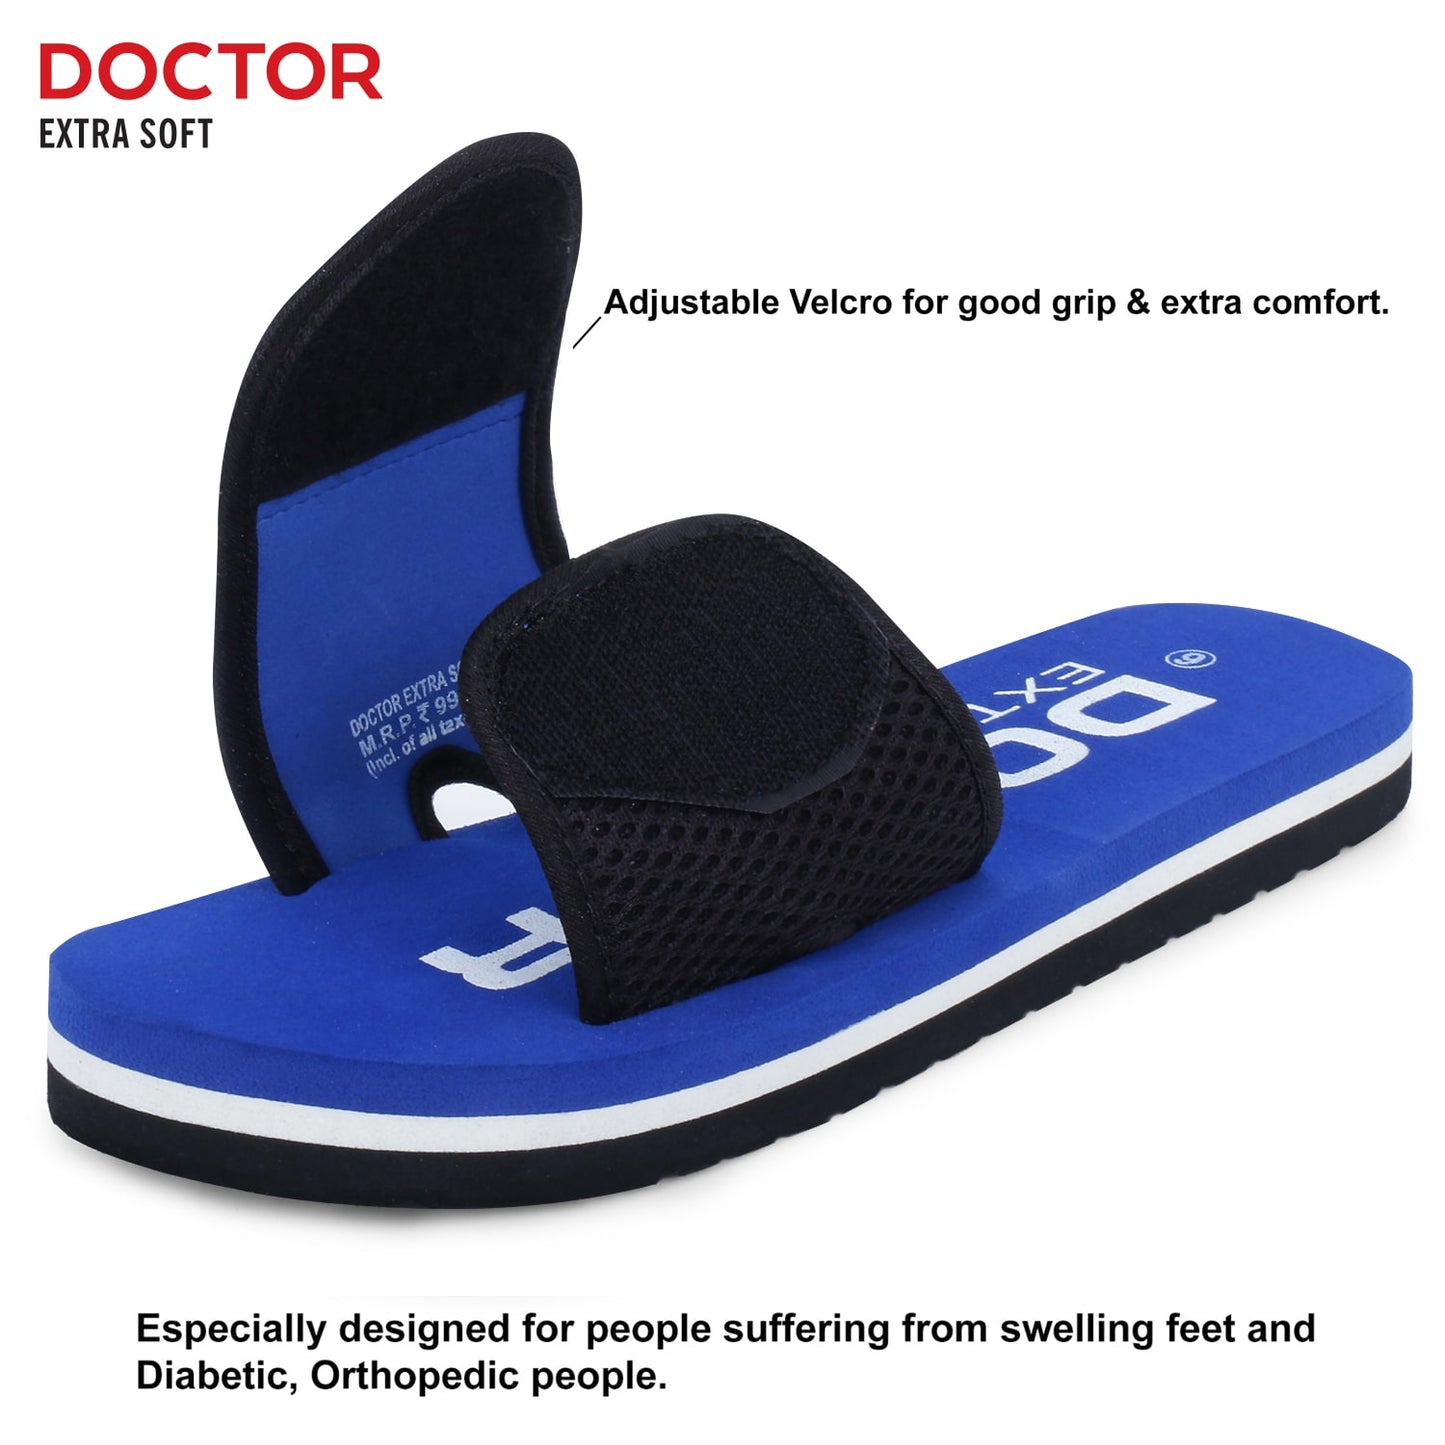 DOCTOR EXTRA SOFT Women's Slippers/Flip-flops D-17 For Ankle & Heel Pain Relief